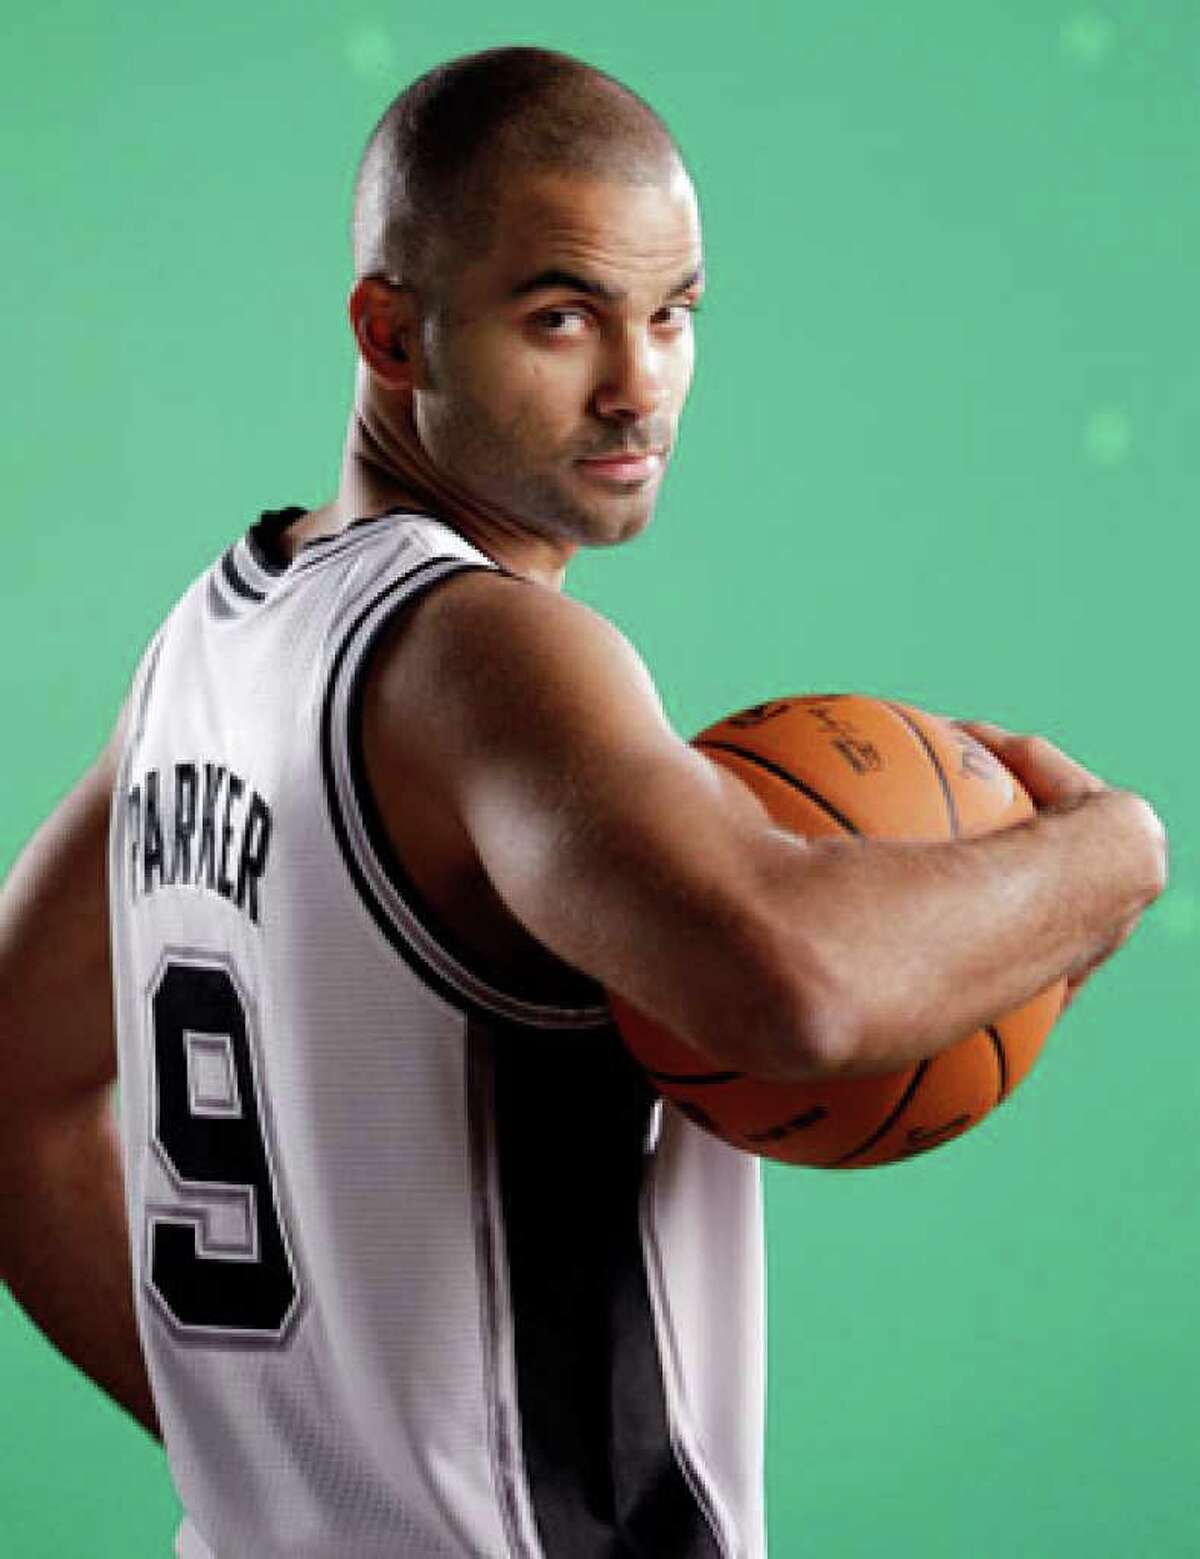 Spurs guard Tony Parker, posing for a photo during media day Monday, has been the topic of many rumors and much speculation during the offseason. He is entering the final season of a six-year, $66 million contract.